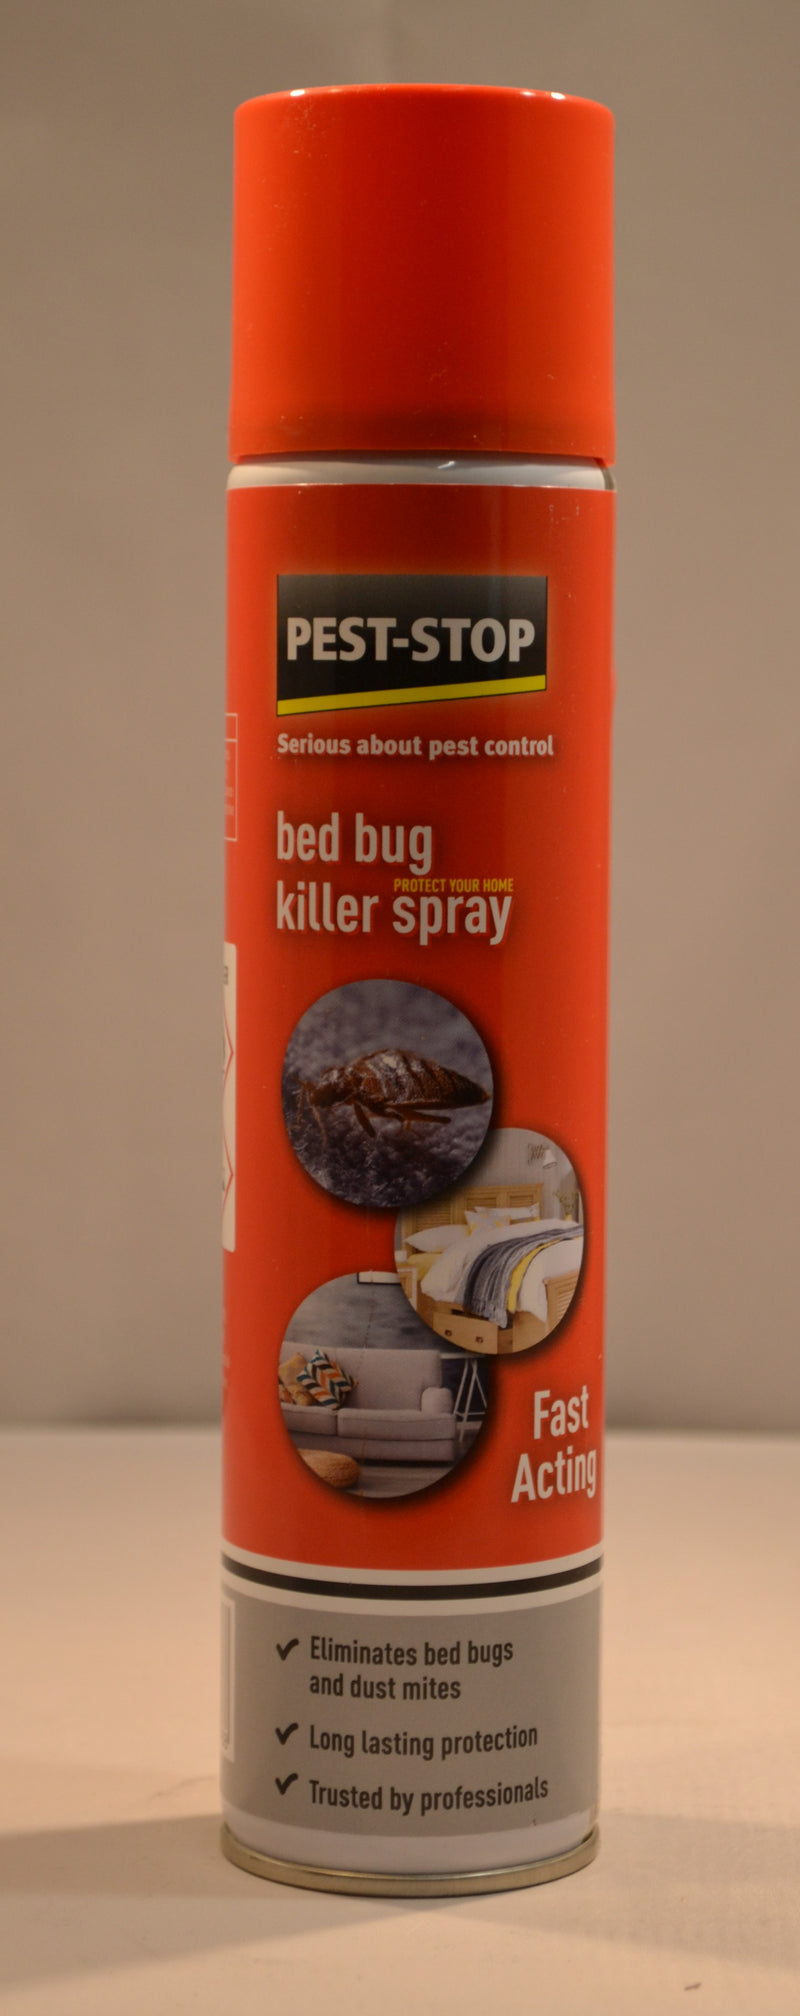 Pest-Stop - Fast Acting Bed Bug Killer Spray - 300ml